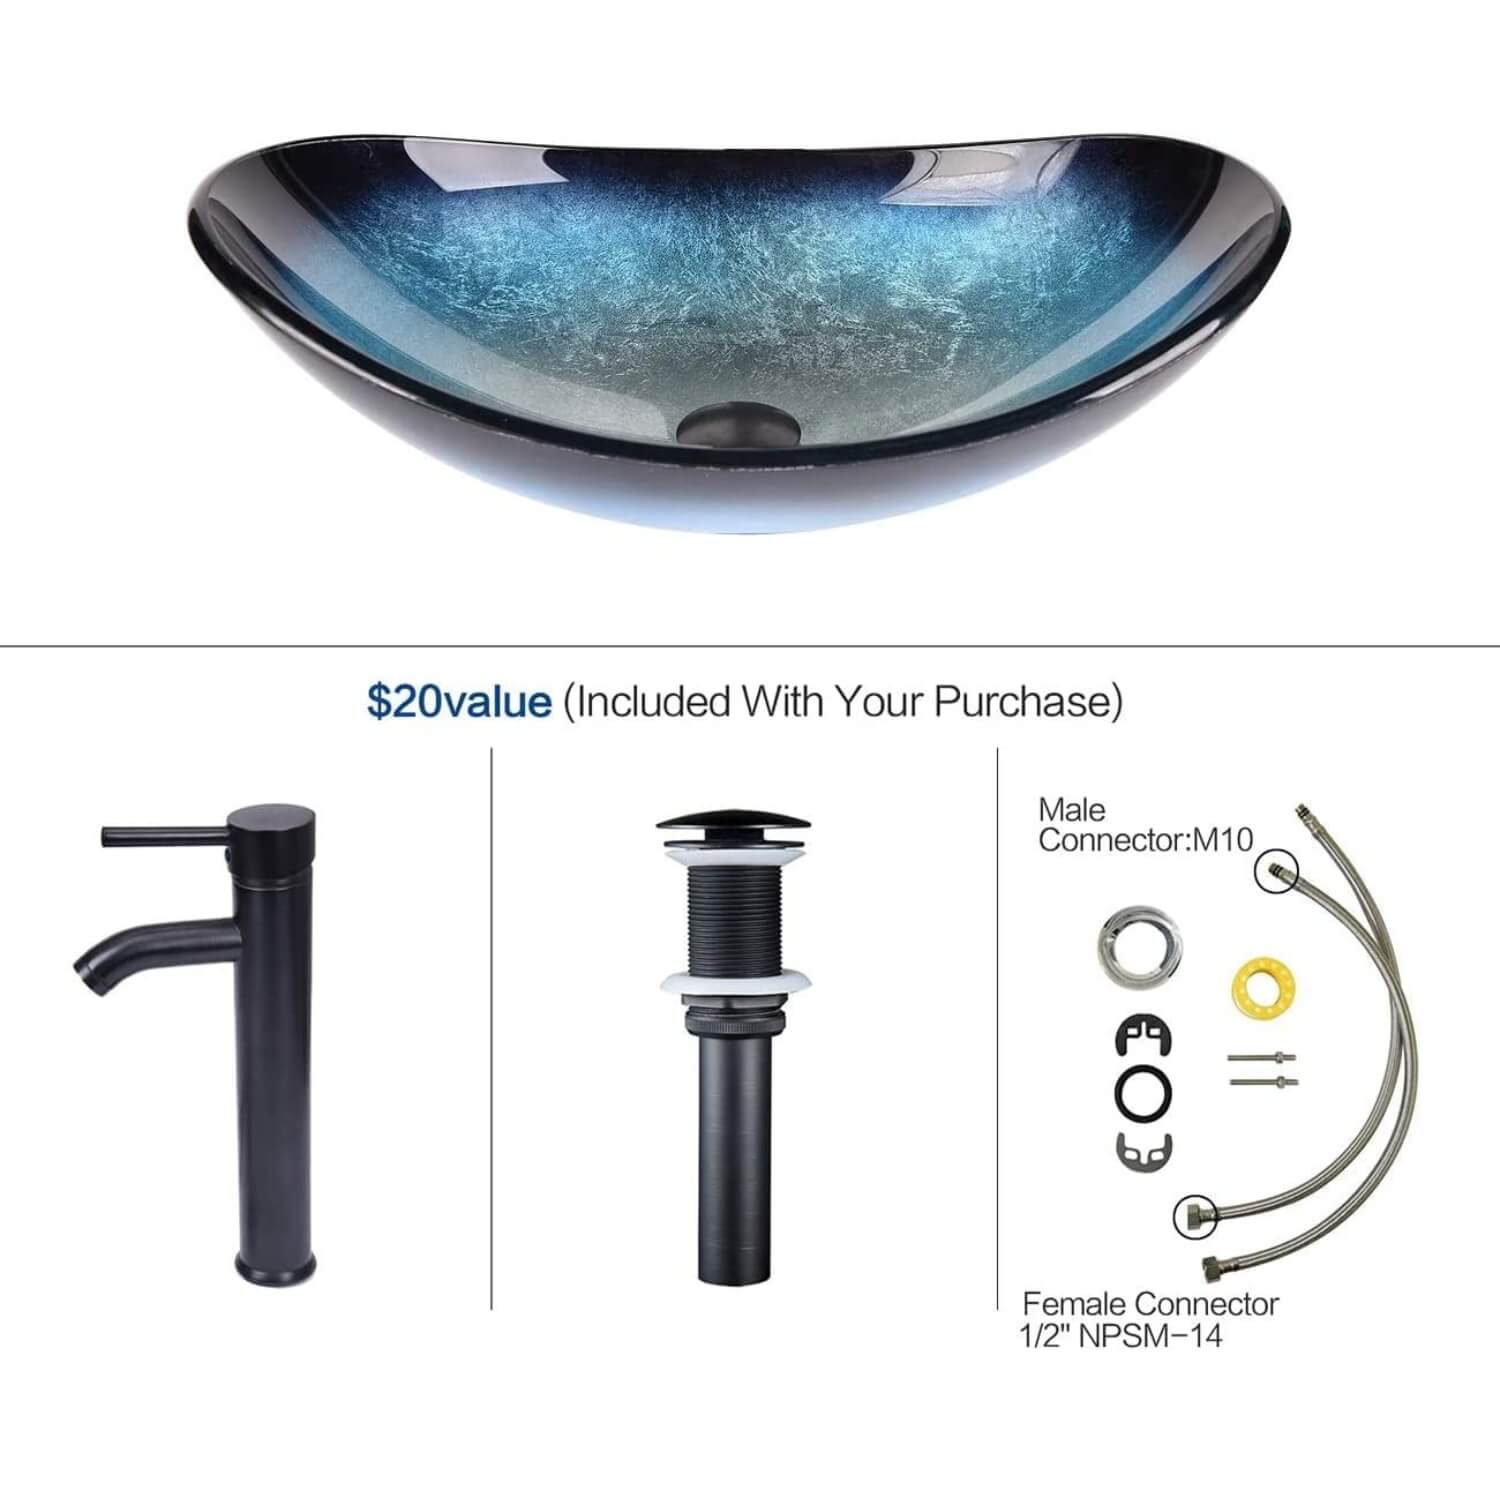 Elecwish Blue boat glass sink with component